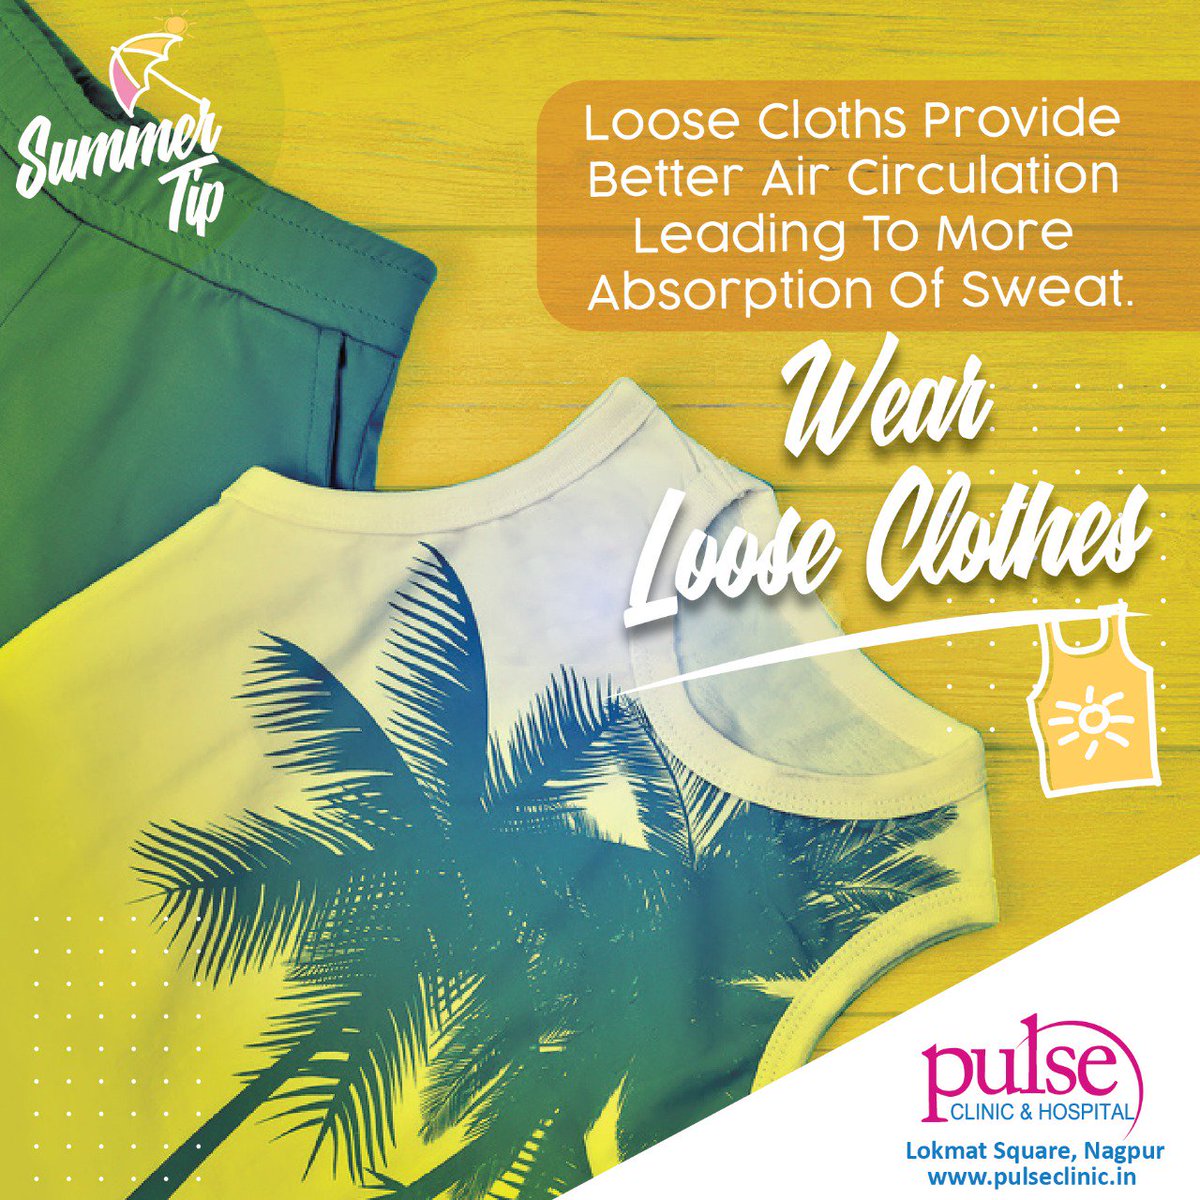 We should wear #looseclothes in #SummerHairdration because during summers we tend to #sweat a lot . Cotton clothes provide better #aircirculation leading to more absorption of sweat and thus gives a #coolingeffect to us.
#summertime #pulseclinic